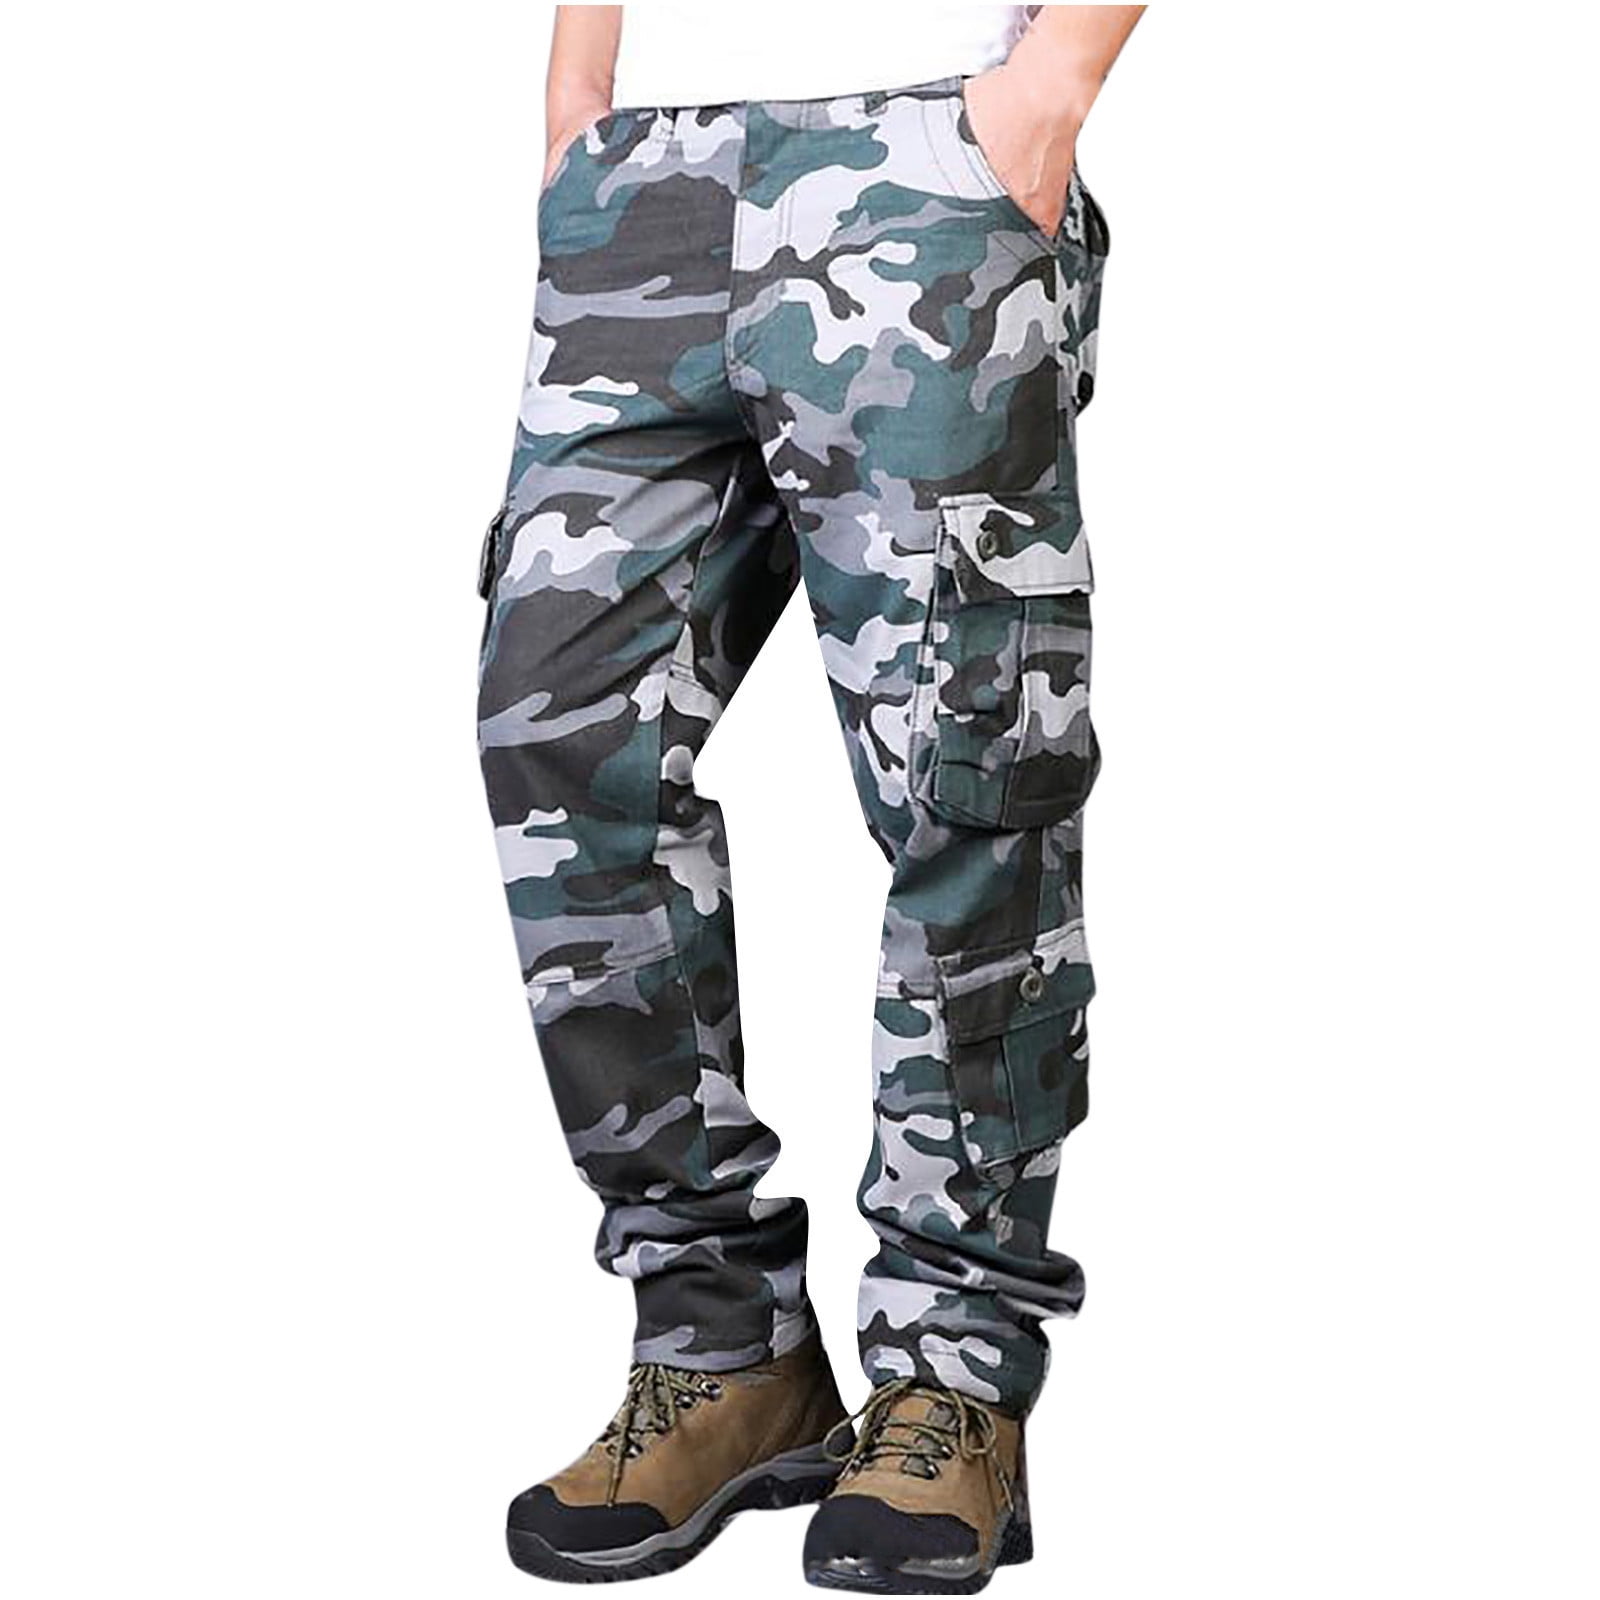 cllios Mens Camo Cargo Pants Big and Tall Multi Pockets Pants Work ...